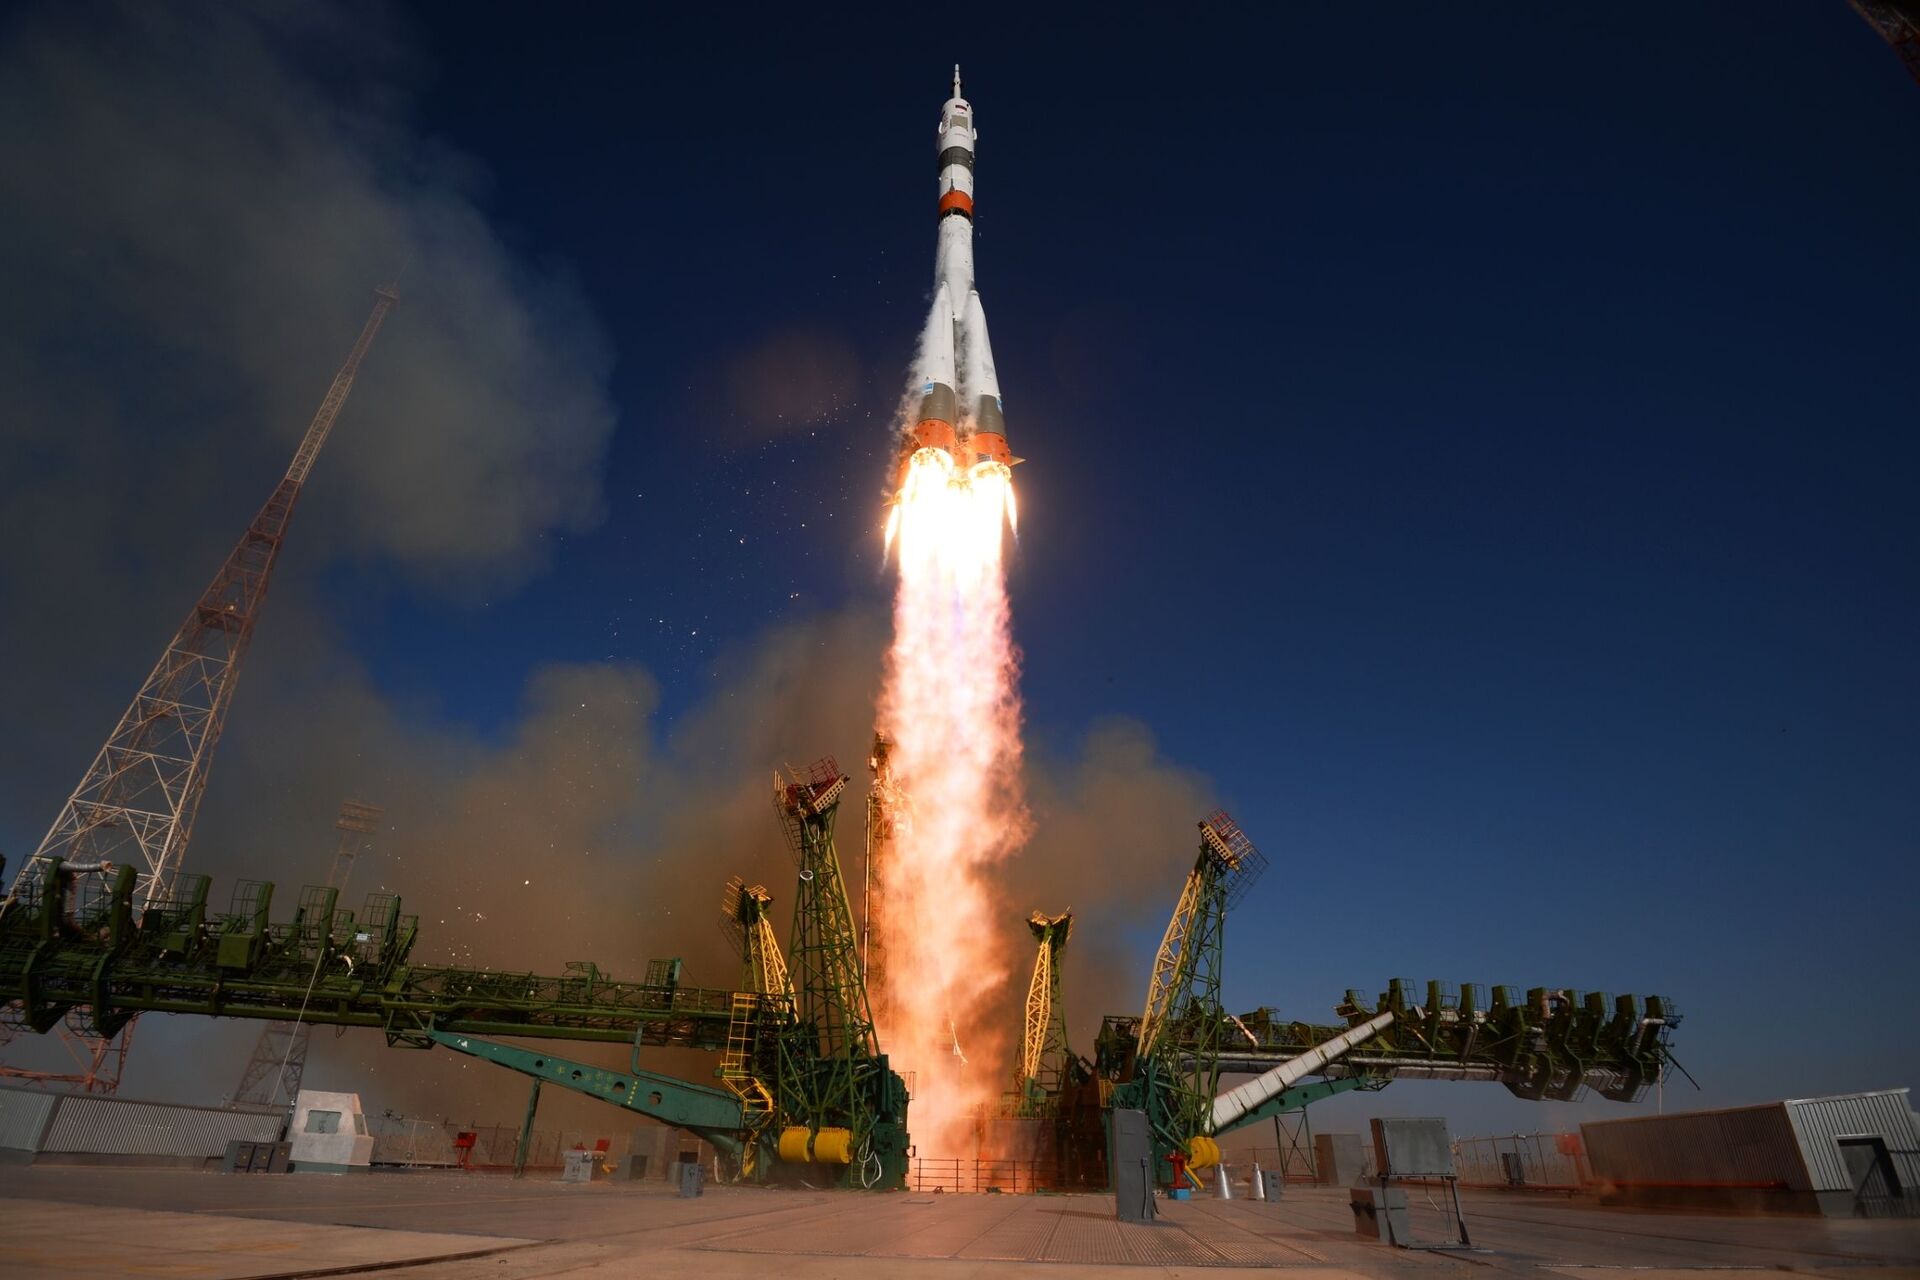 Russia’s Legendary Soyuz Space Rocket Gets New Paint Job for First Time in Over 50 Years - Sputnik International, 1920, 13.03.2021